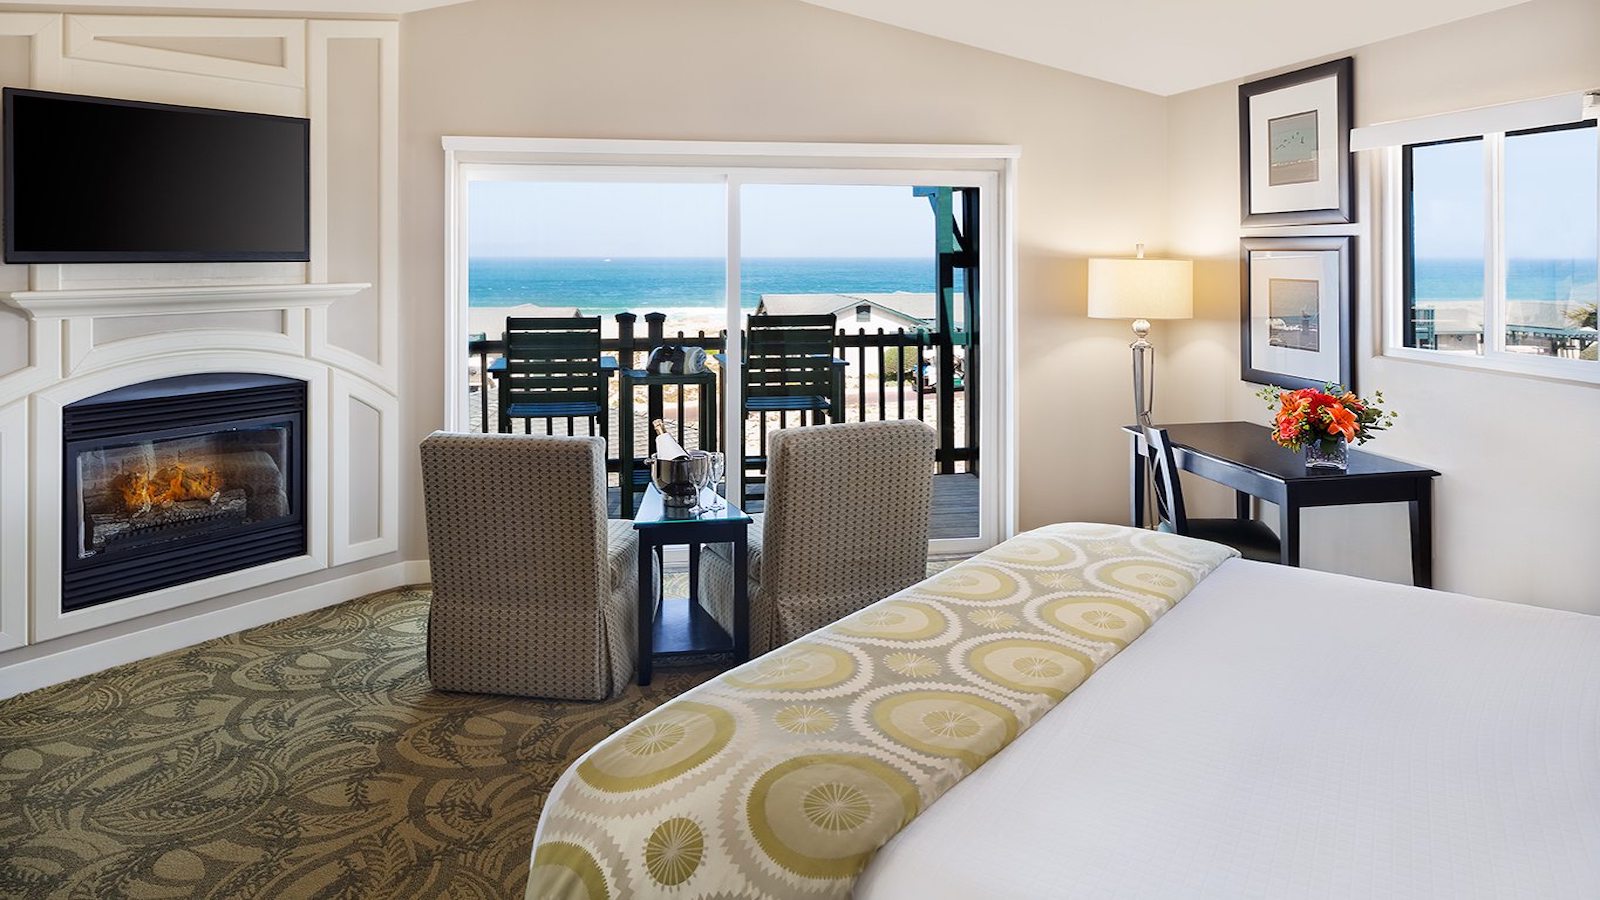 Queen bed, fireplace and a balcony connected to a hotel room at Sanctuary Beach Resort in Monterey, California.